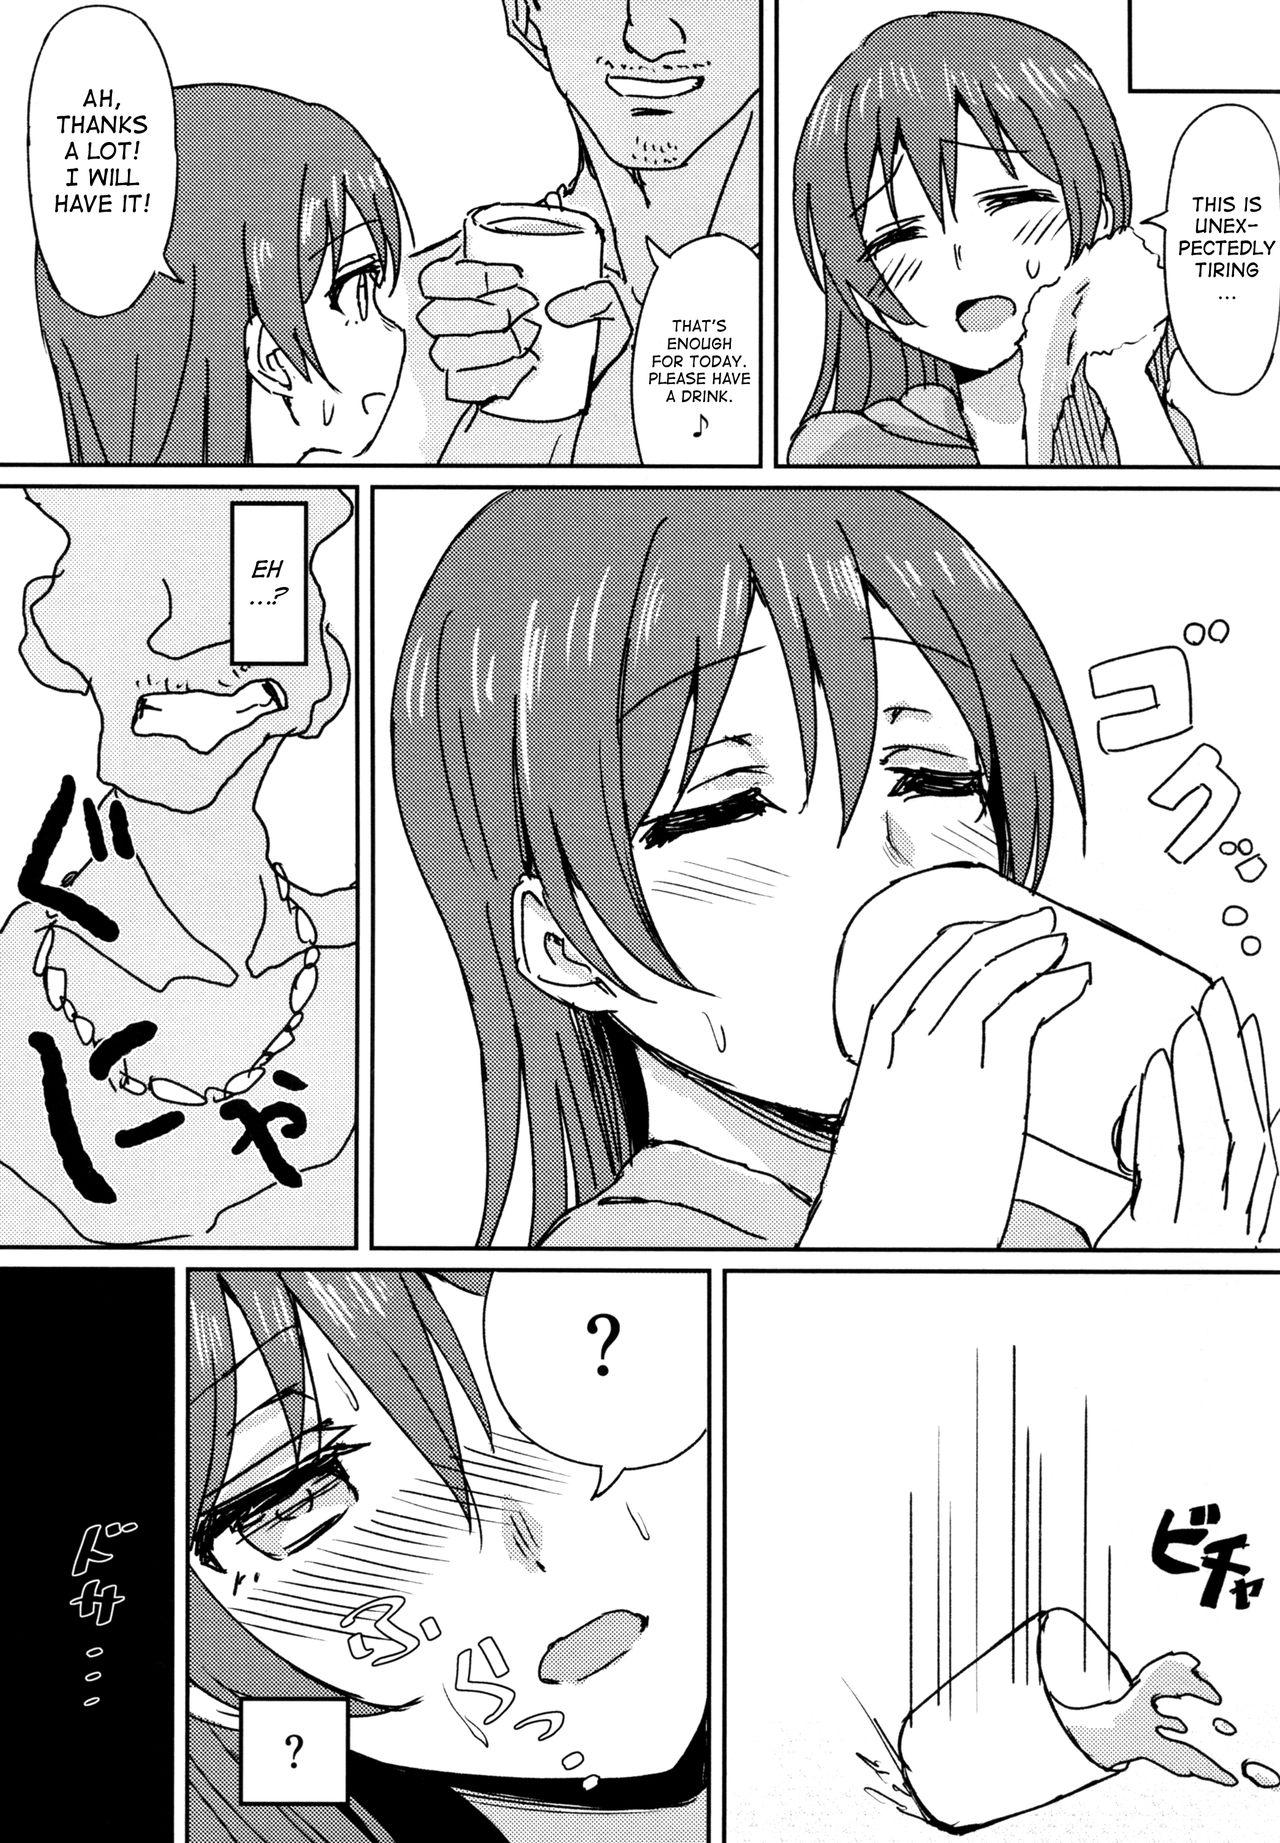 Mature Woman Hah,Wrench This! - Love live Ruiva - Page 9